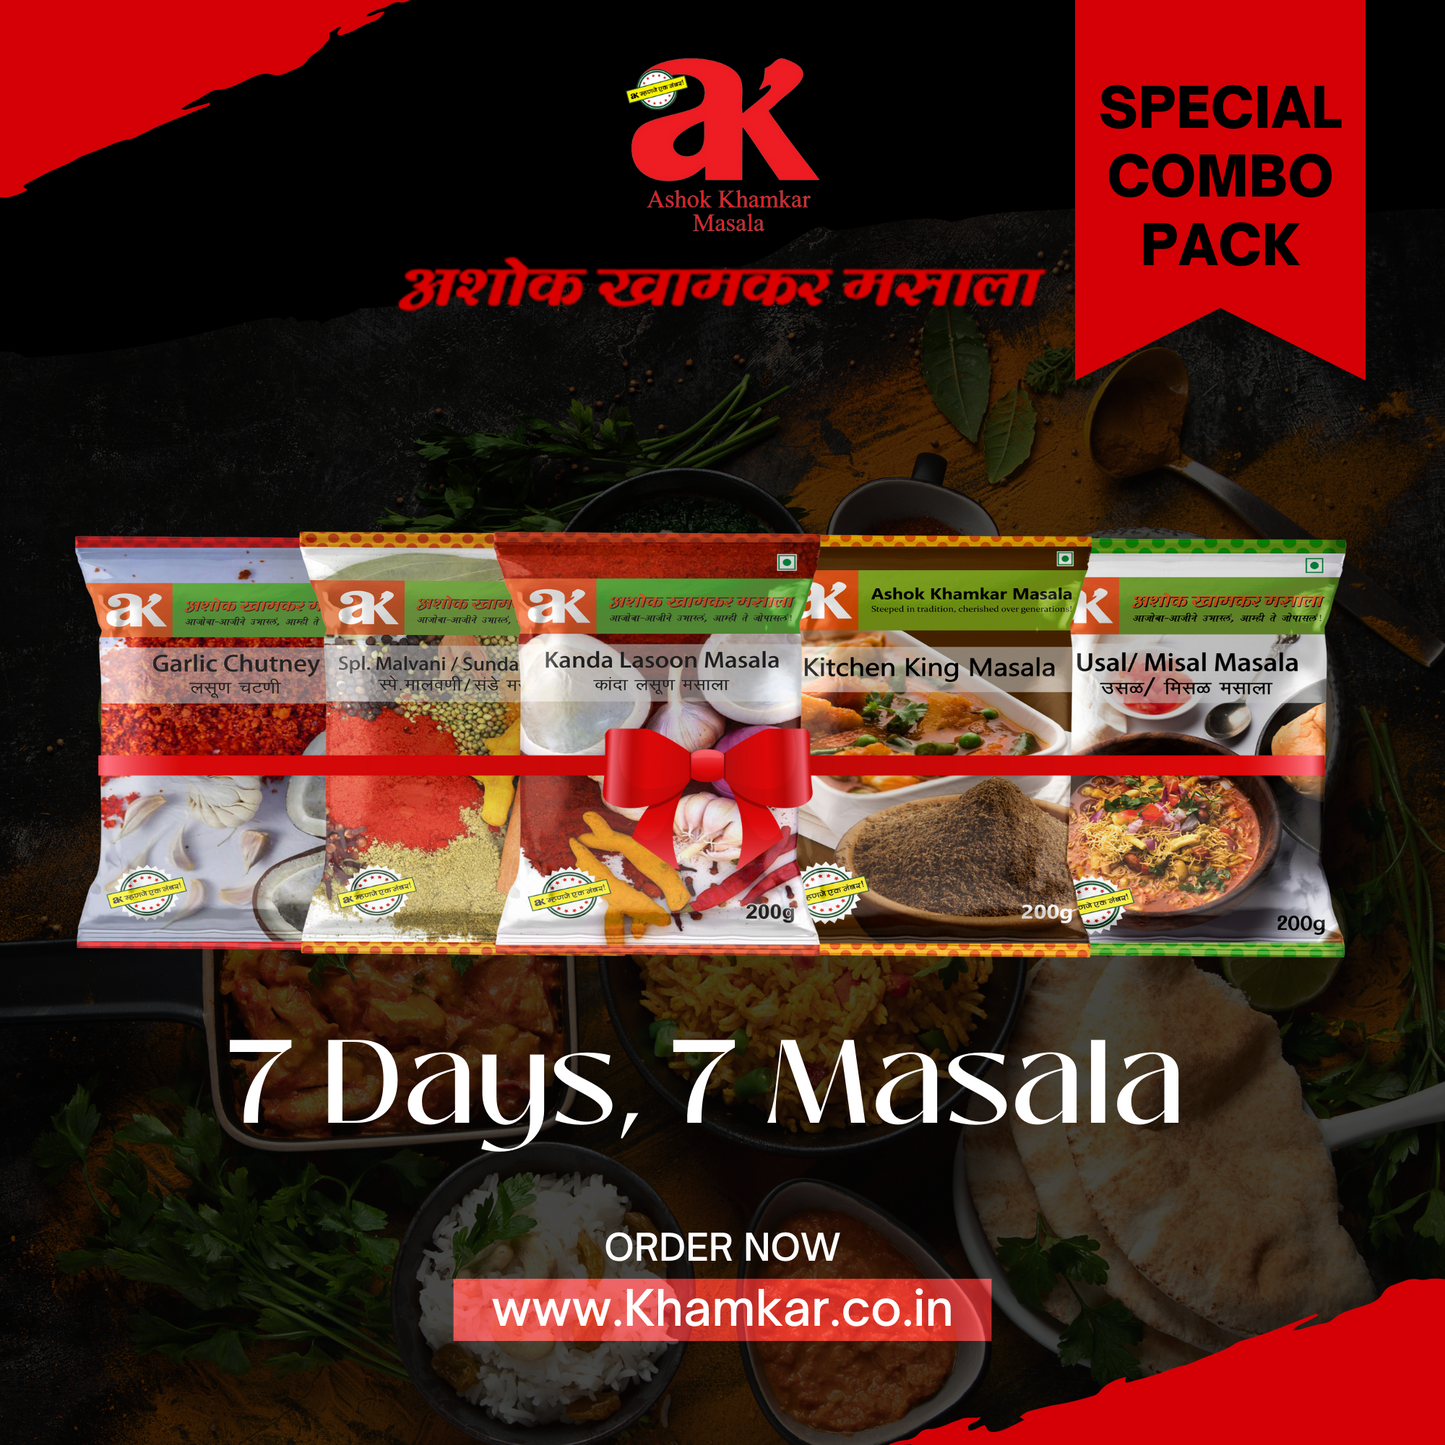 7 Days Special Combo Pack.